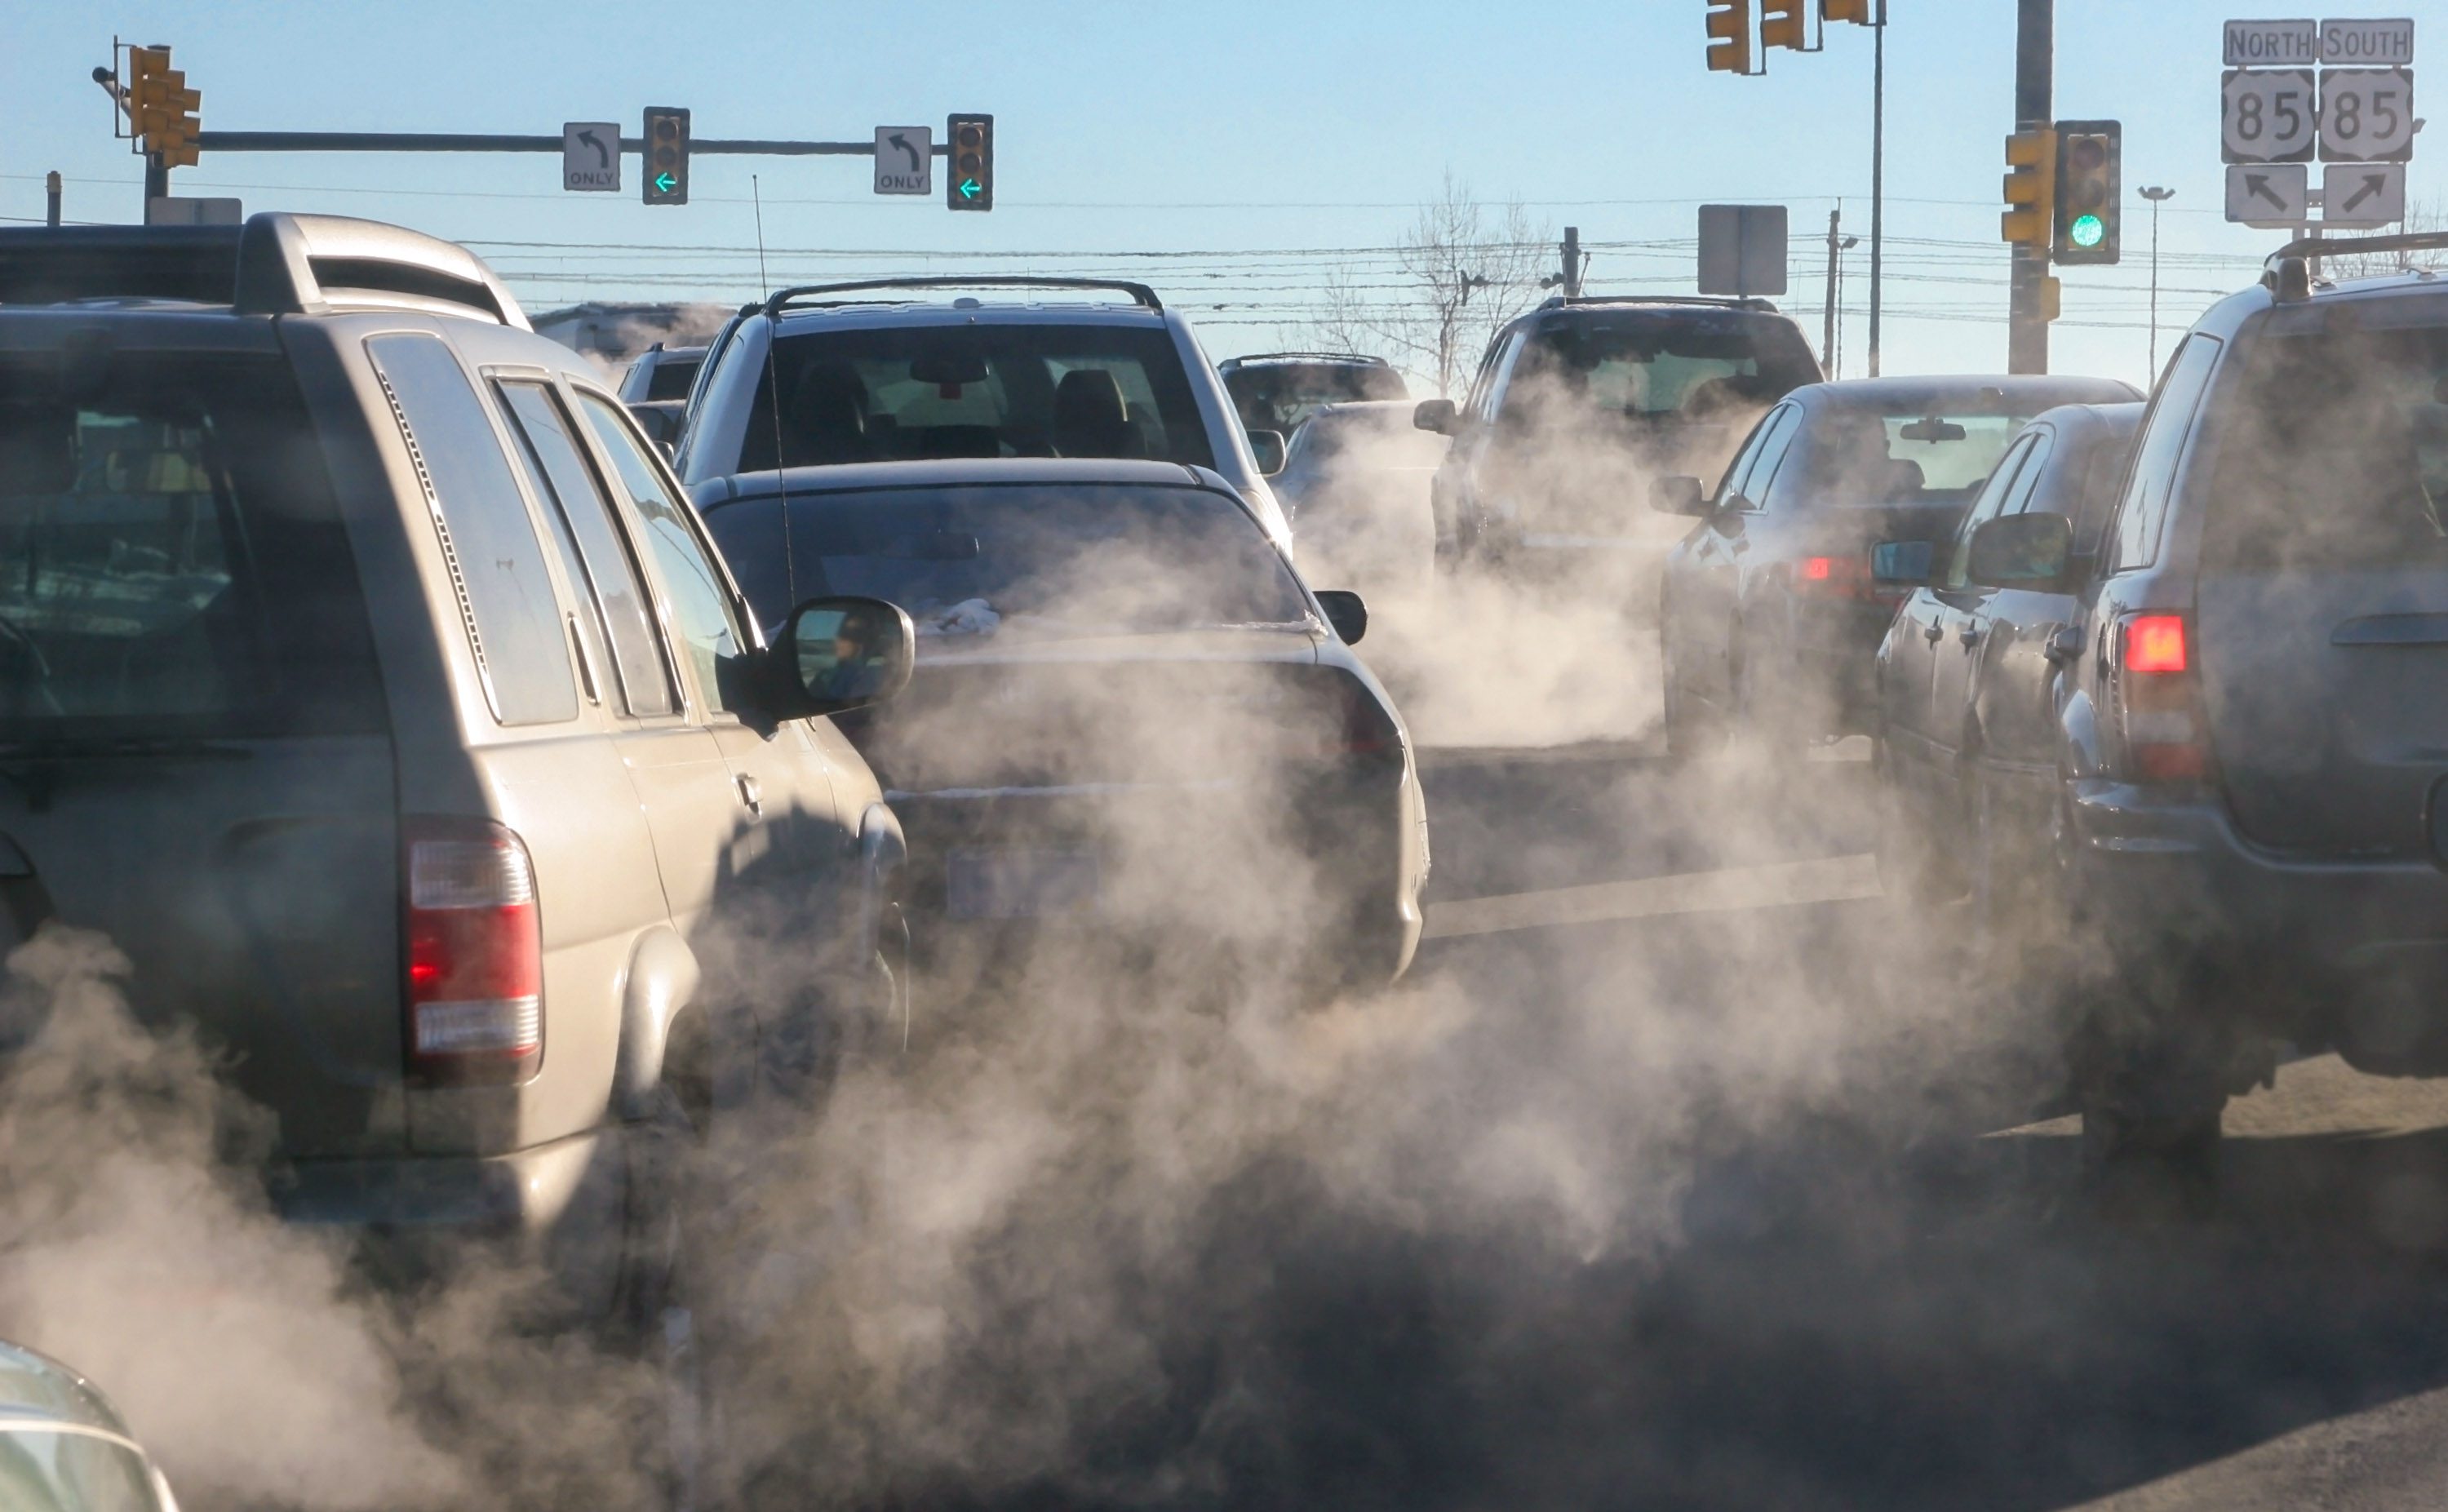 At an intersection, exhaust pours out of the tailpipes of vehicles.